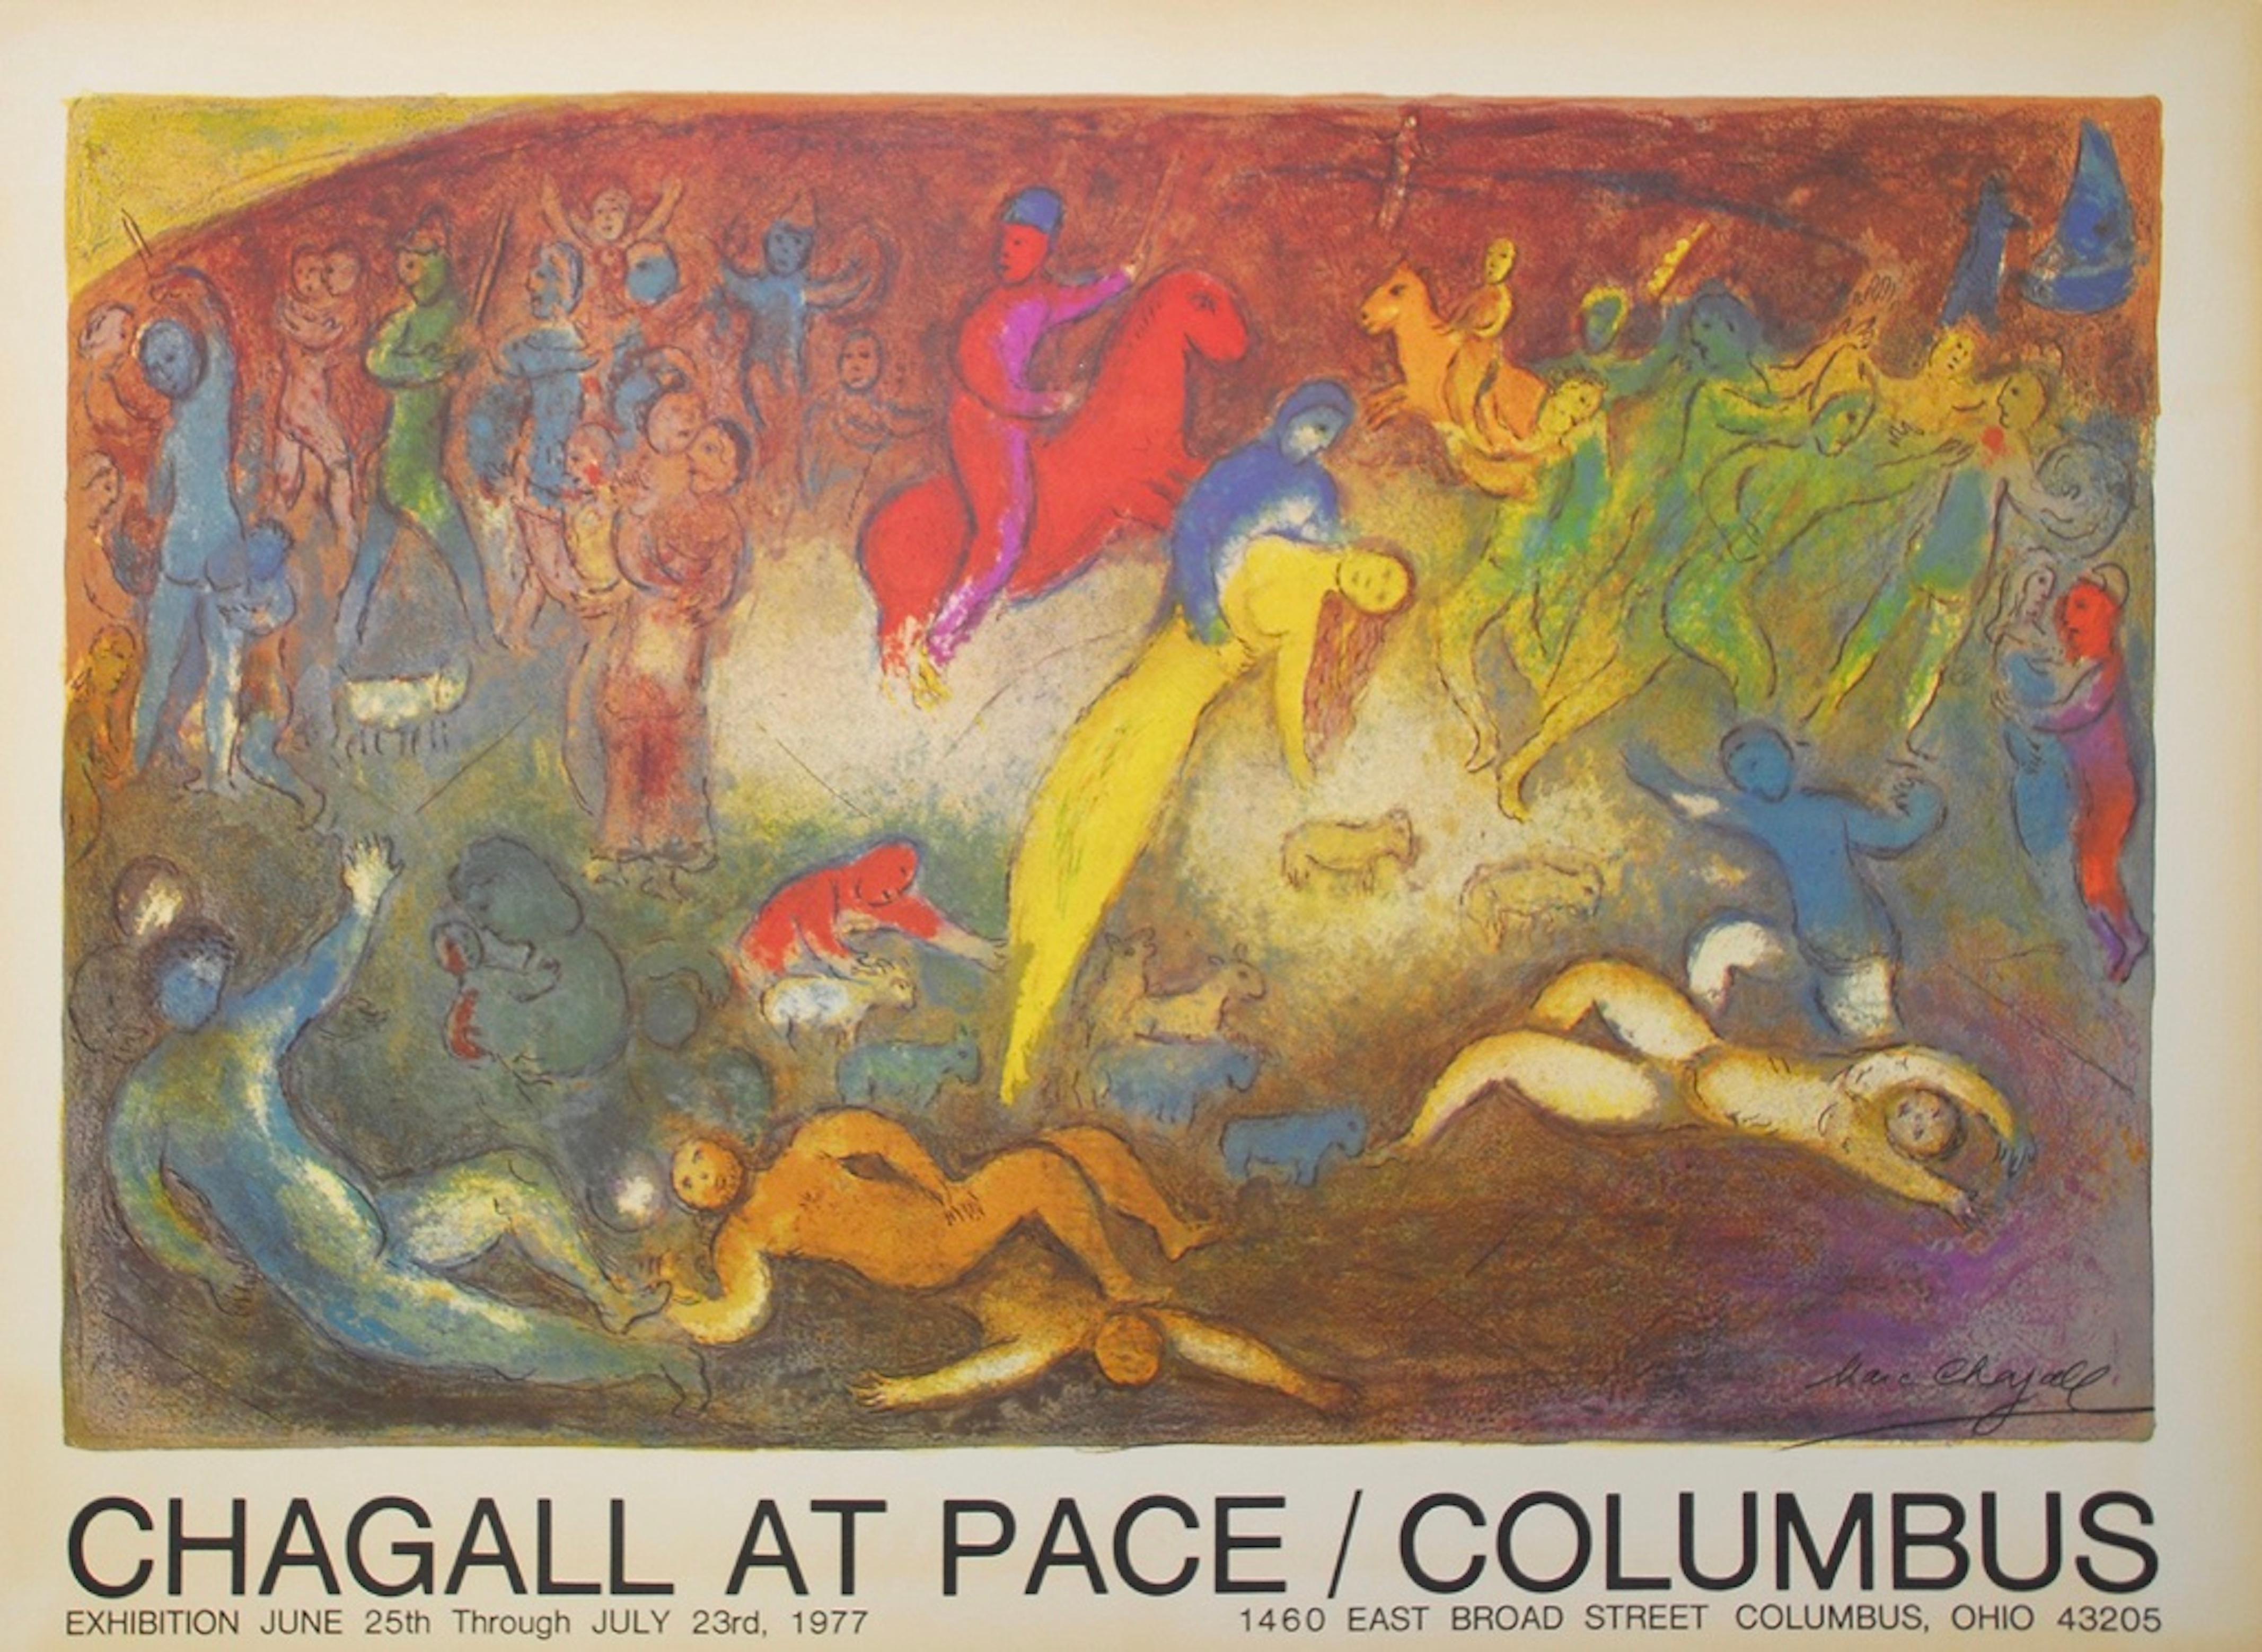 "Chagall At Pace/Columbus" by Marc Chagall
Exhibition poster
Color offset lithography
Signed in the print
Publisher: Pace Gallery, Columbus
